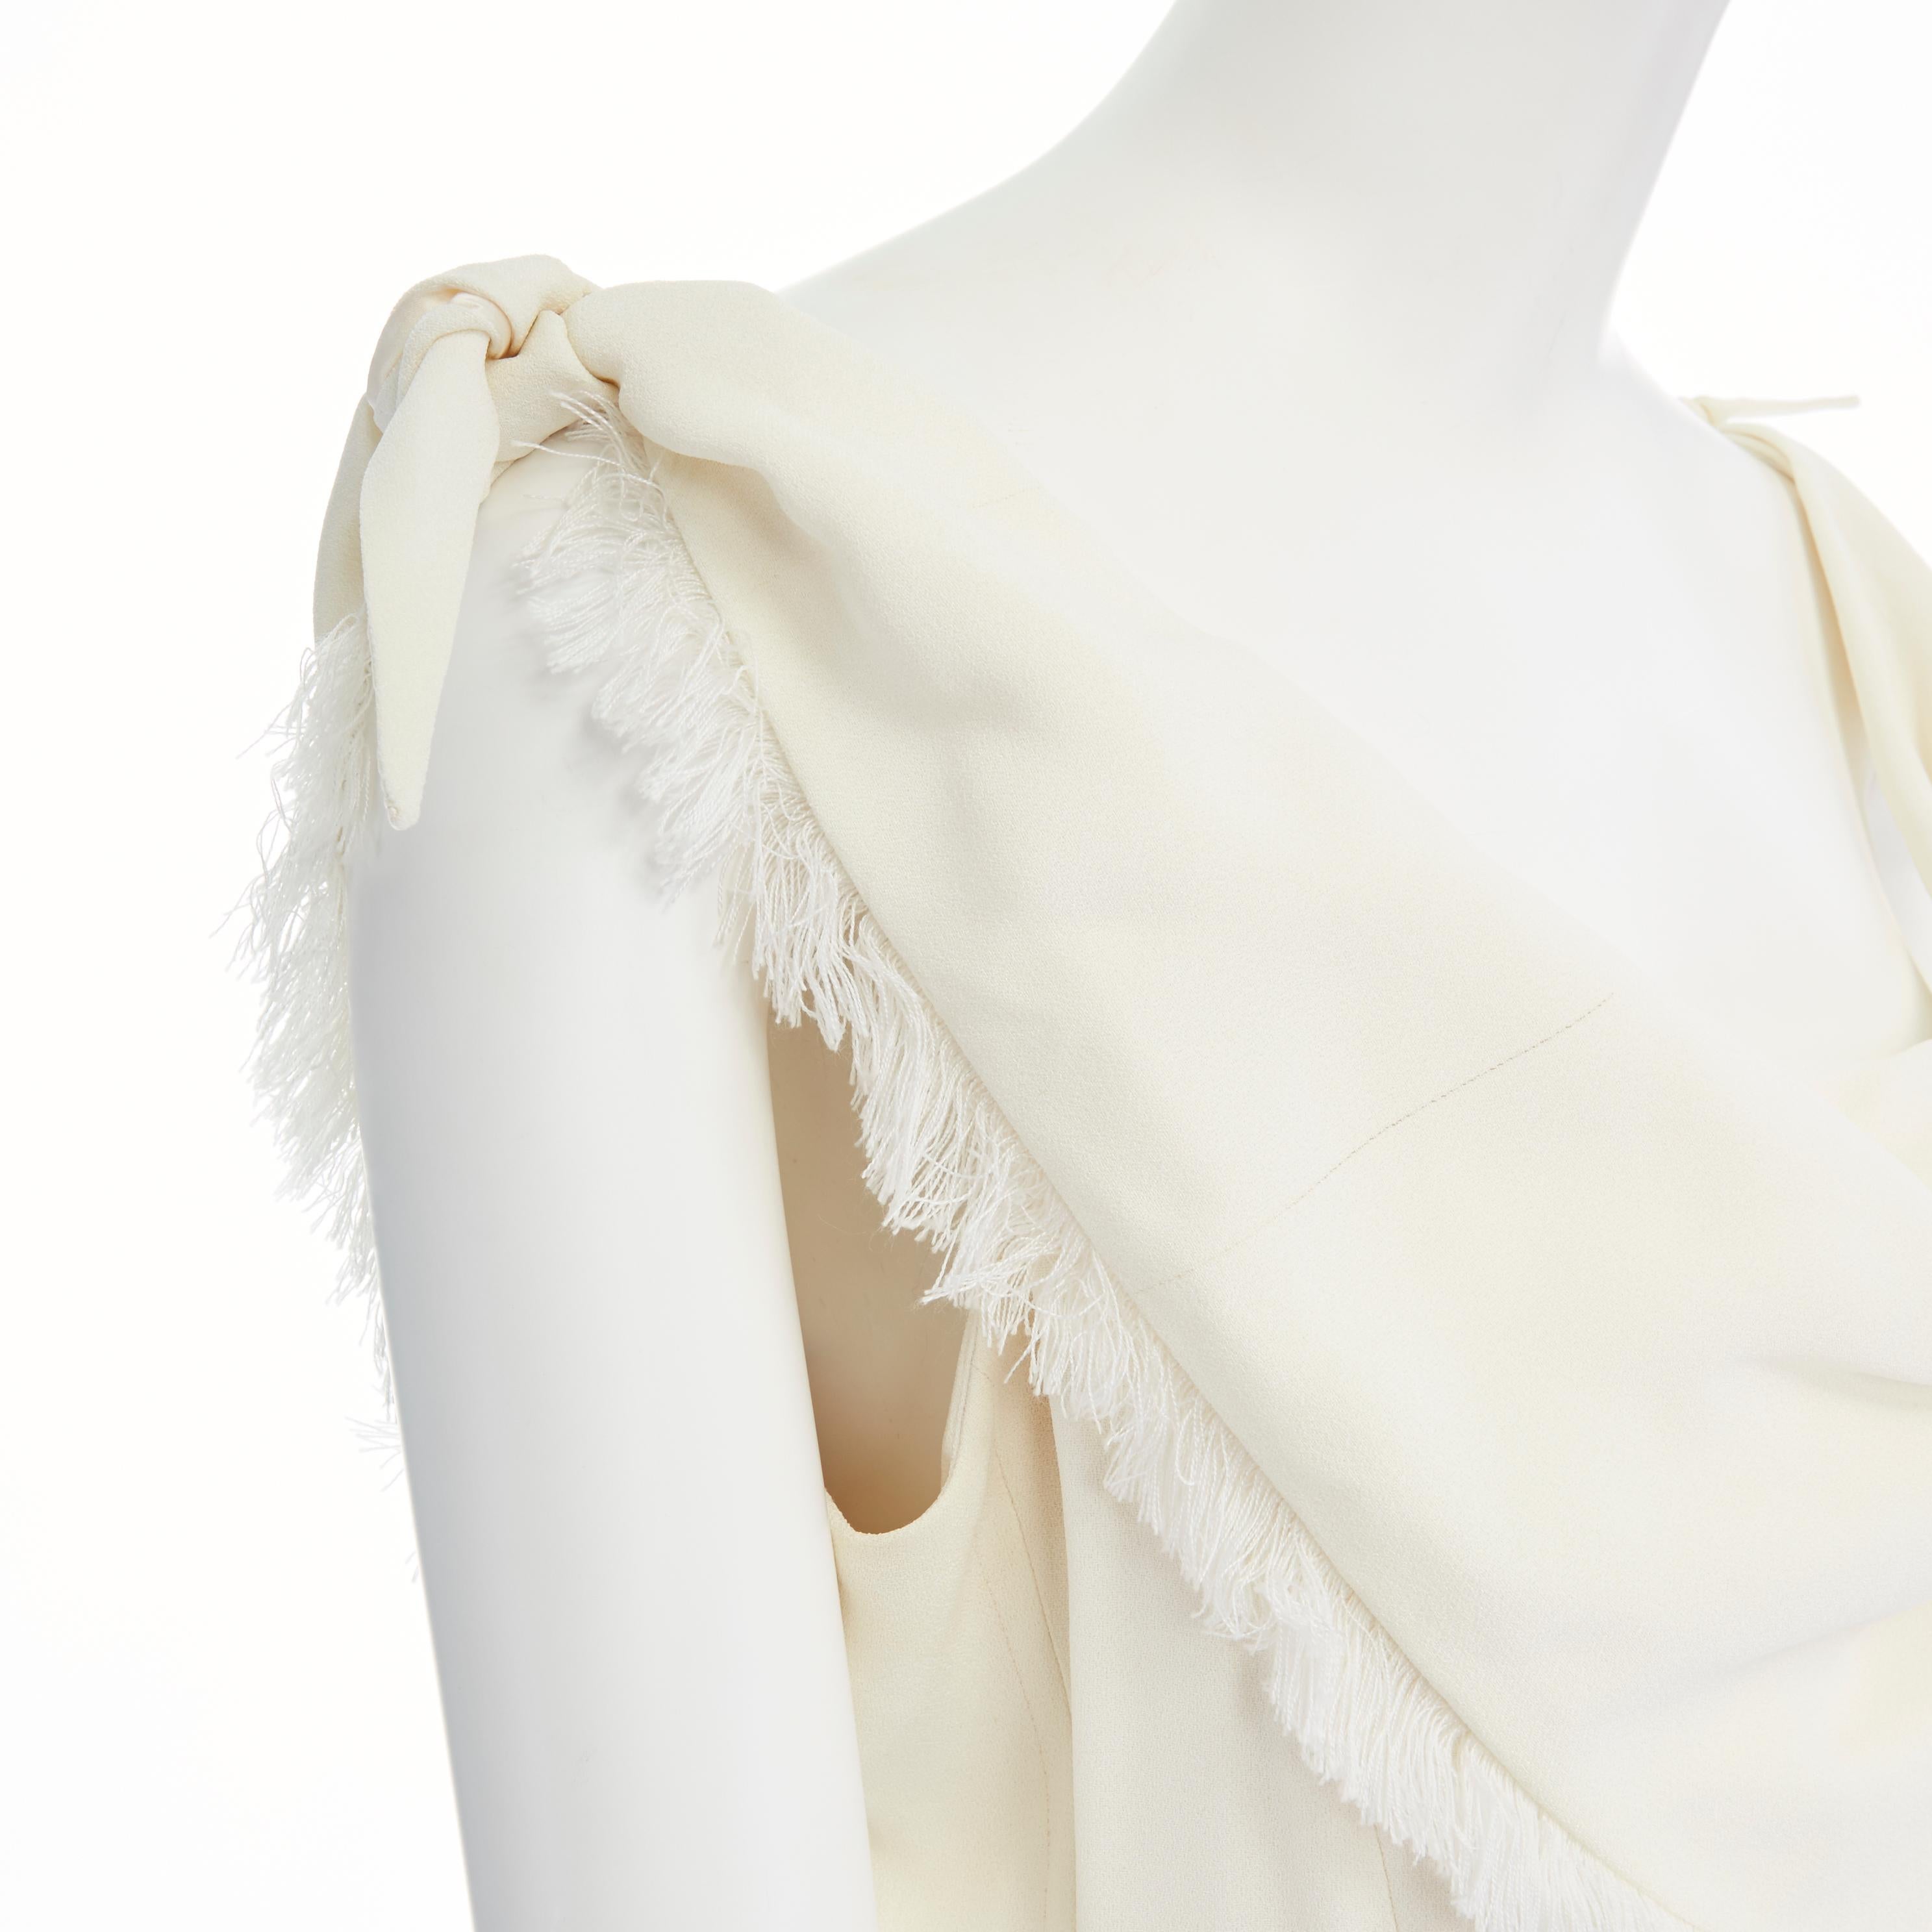 CHRISTIAN DIOR cream crepe fringe trimmed draped scarf tie strap dress FR40 L
Brand: Christian Dior
Designer: Christian Dior
Model Name / Style: Neckerchief dress
Material: Acetate, viscose 
Color: White
Pattern: Solid
Closure: Zip
Extra Detail: